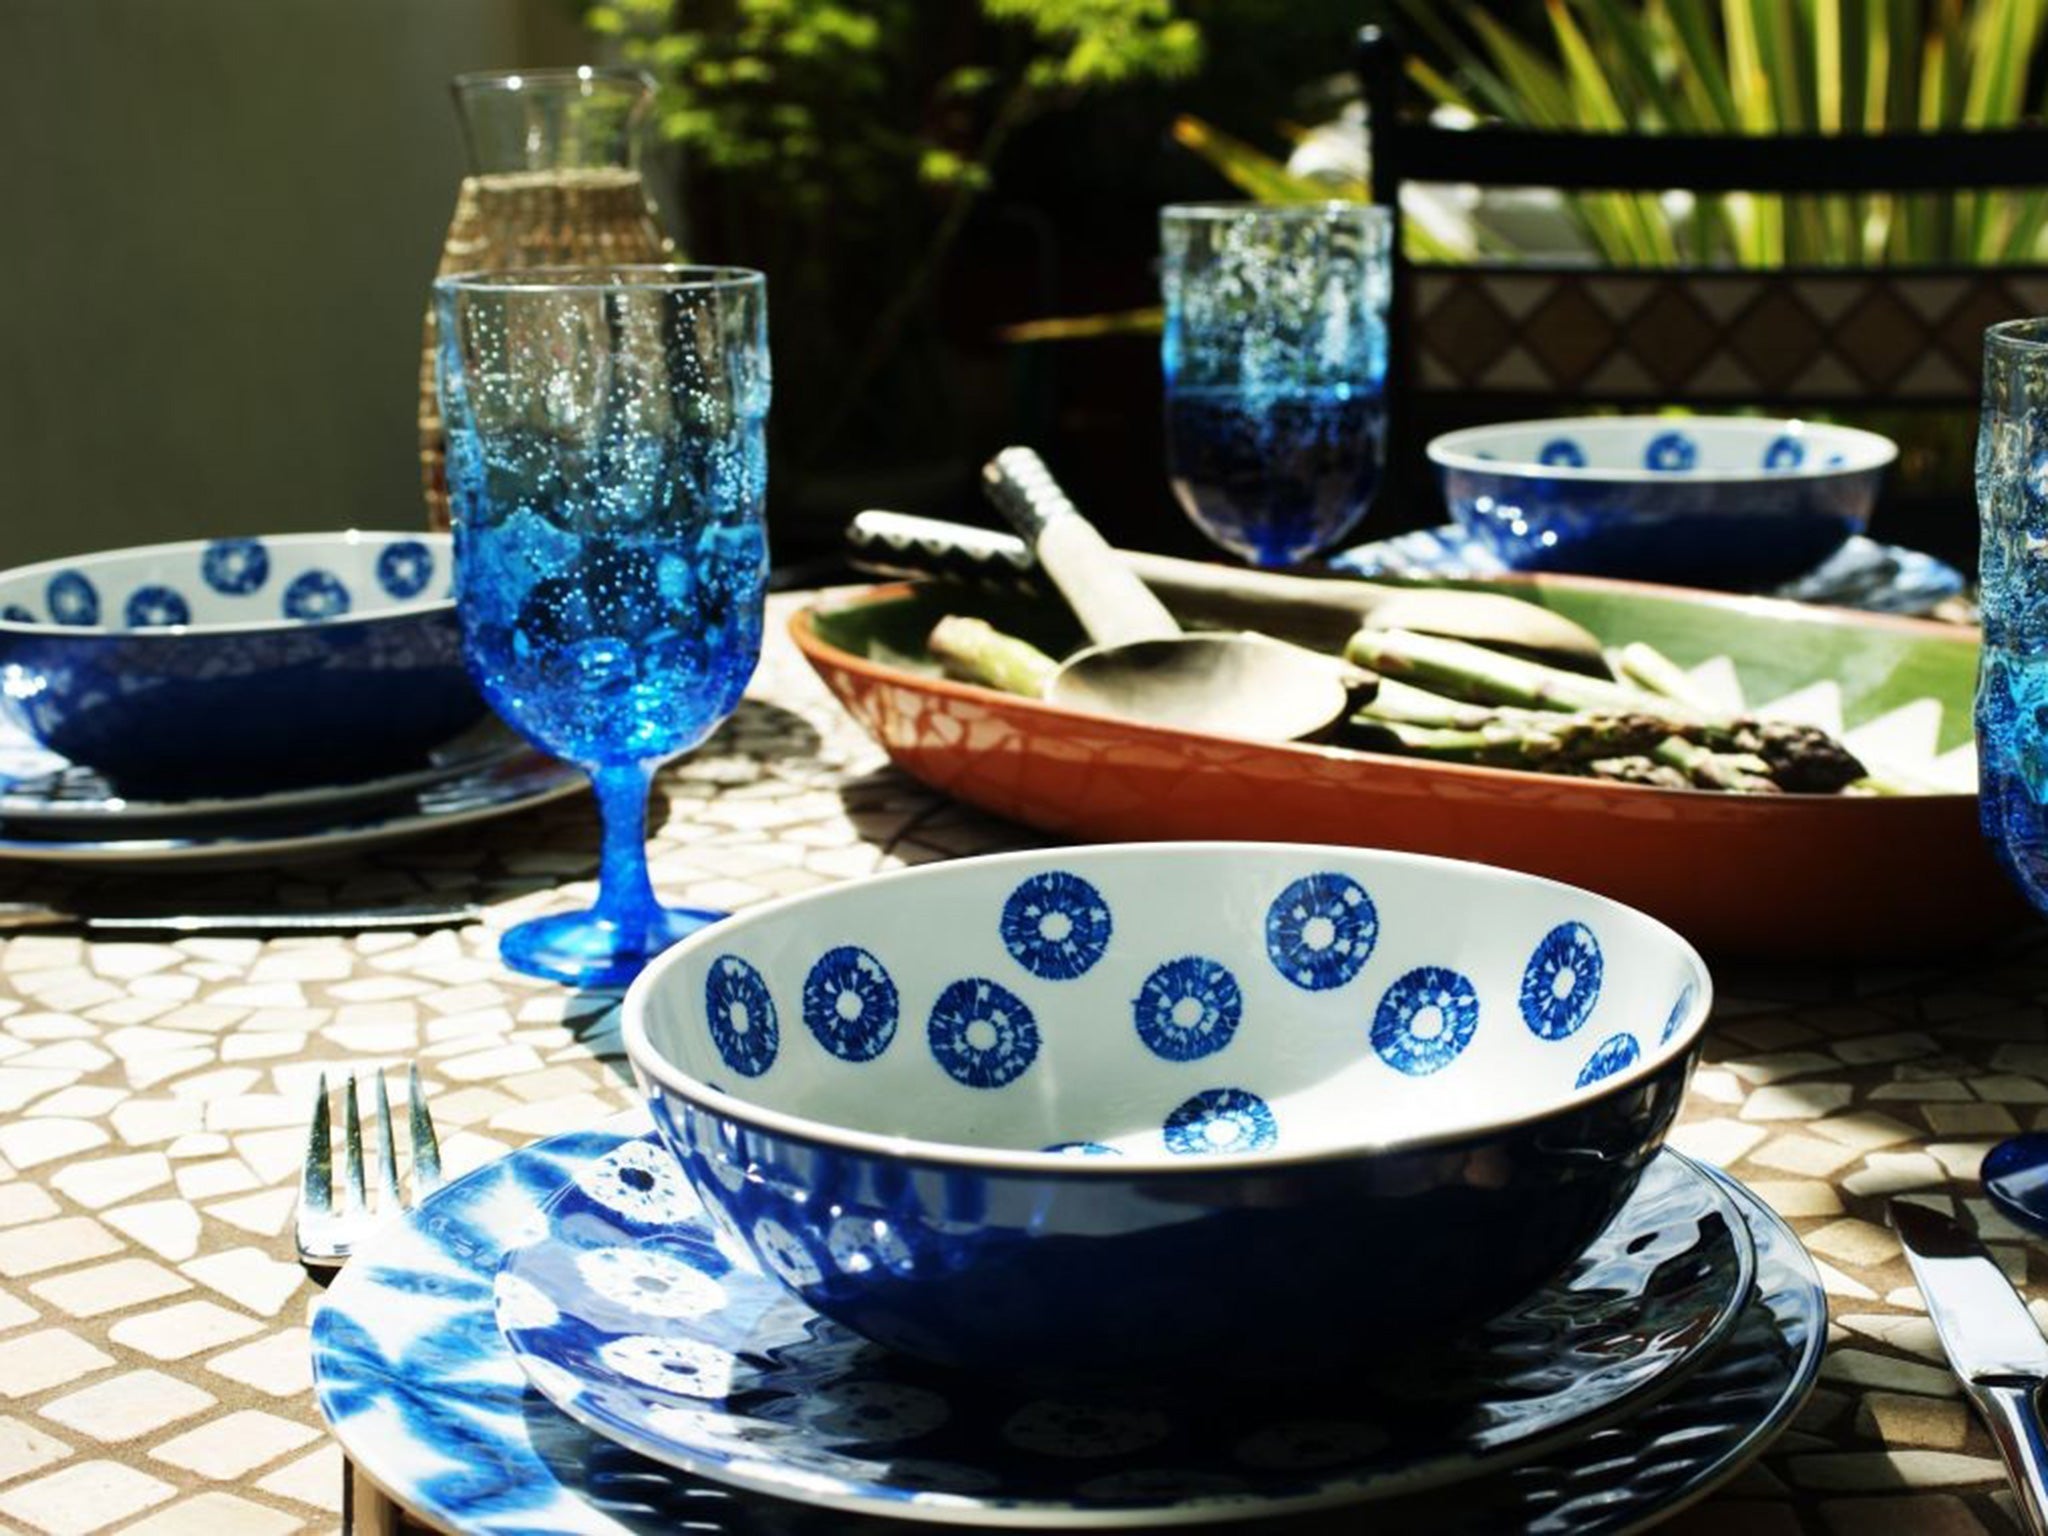 The blue and white Indigo range from M&S, with matching wine goblets and the green and terracotta Alvito serving platter from Habitat.